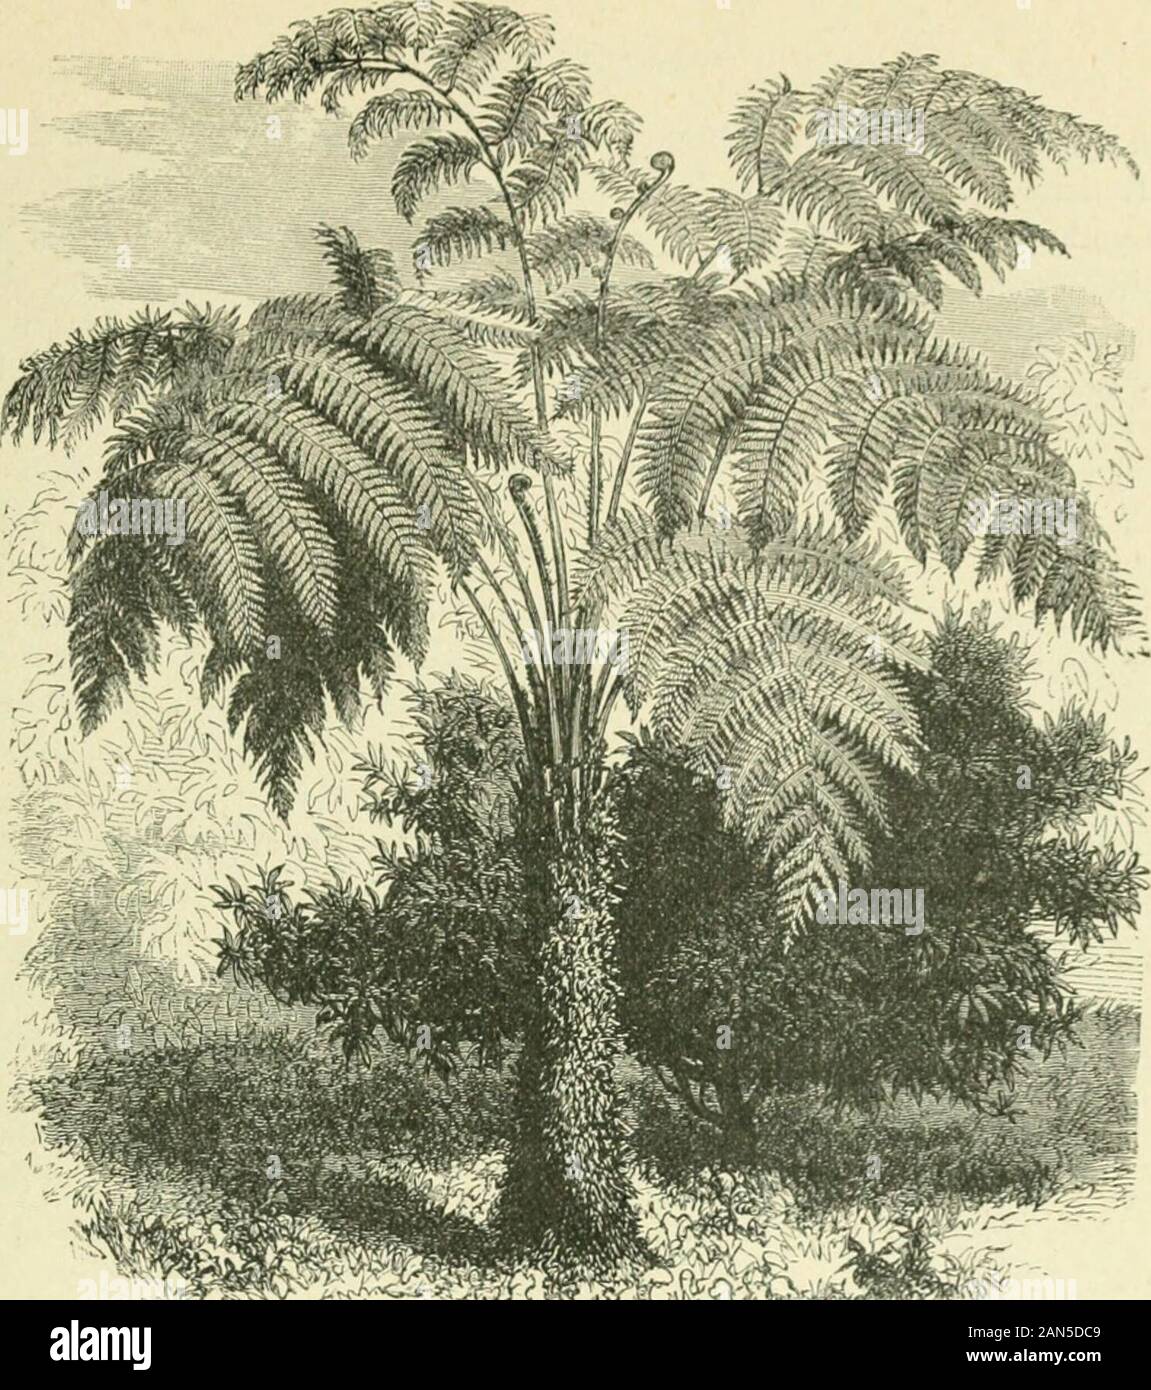 Seven years in Ceylon: stories of mission life . A VIEW IN CliVLON.. A TREE FERN. numbers have now swelled to 340. I long to be back again. I shall return withnew courage, and hope to make up for my short holiday by the renewed vigour wiihwhich I shall be able to go on with my duties. Sister has had three Christian singersover from India during my absence. Two were from the Madura Mission and onefrom Trichinopoly, South India. The latter chants the psalms beautifully, using theGregorian or Free Chants, which are very easy, and which are liked much by ournative Christians, and thus Gods words a Stock Photo